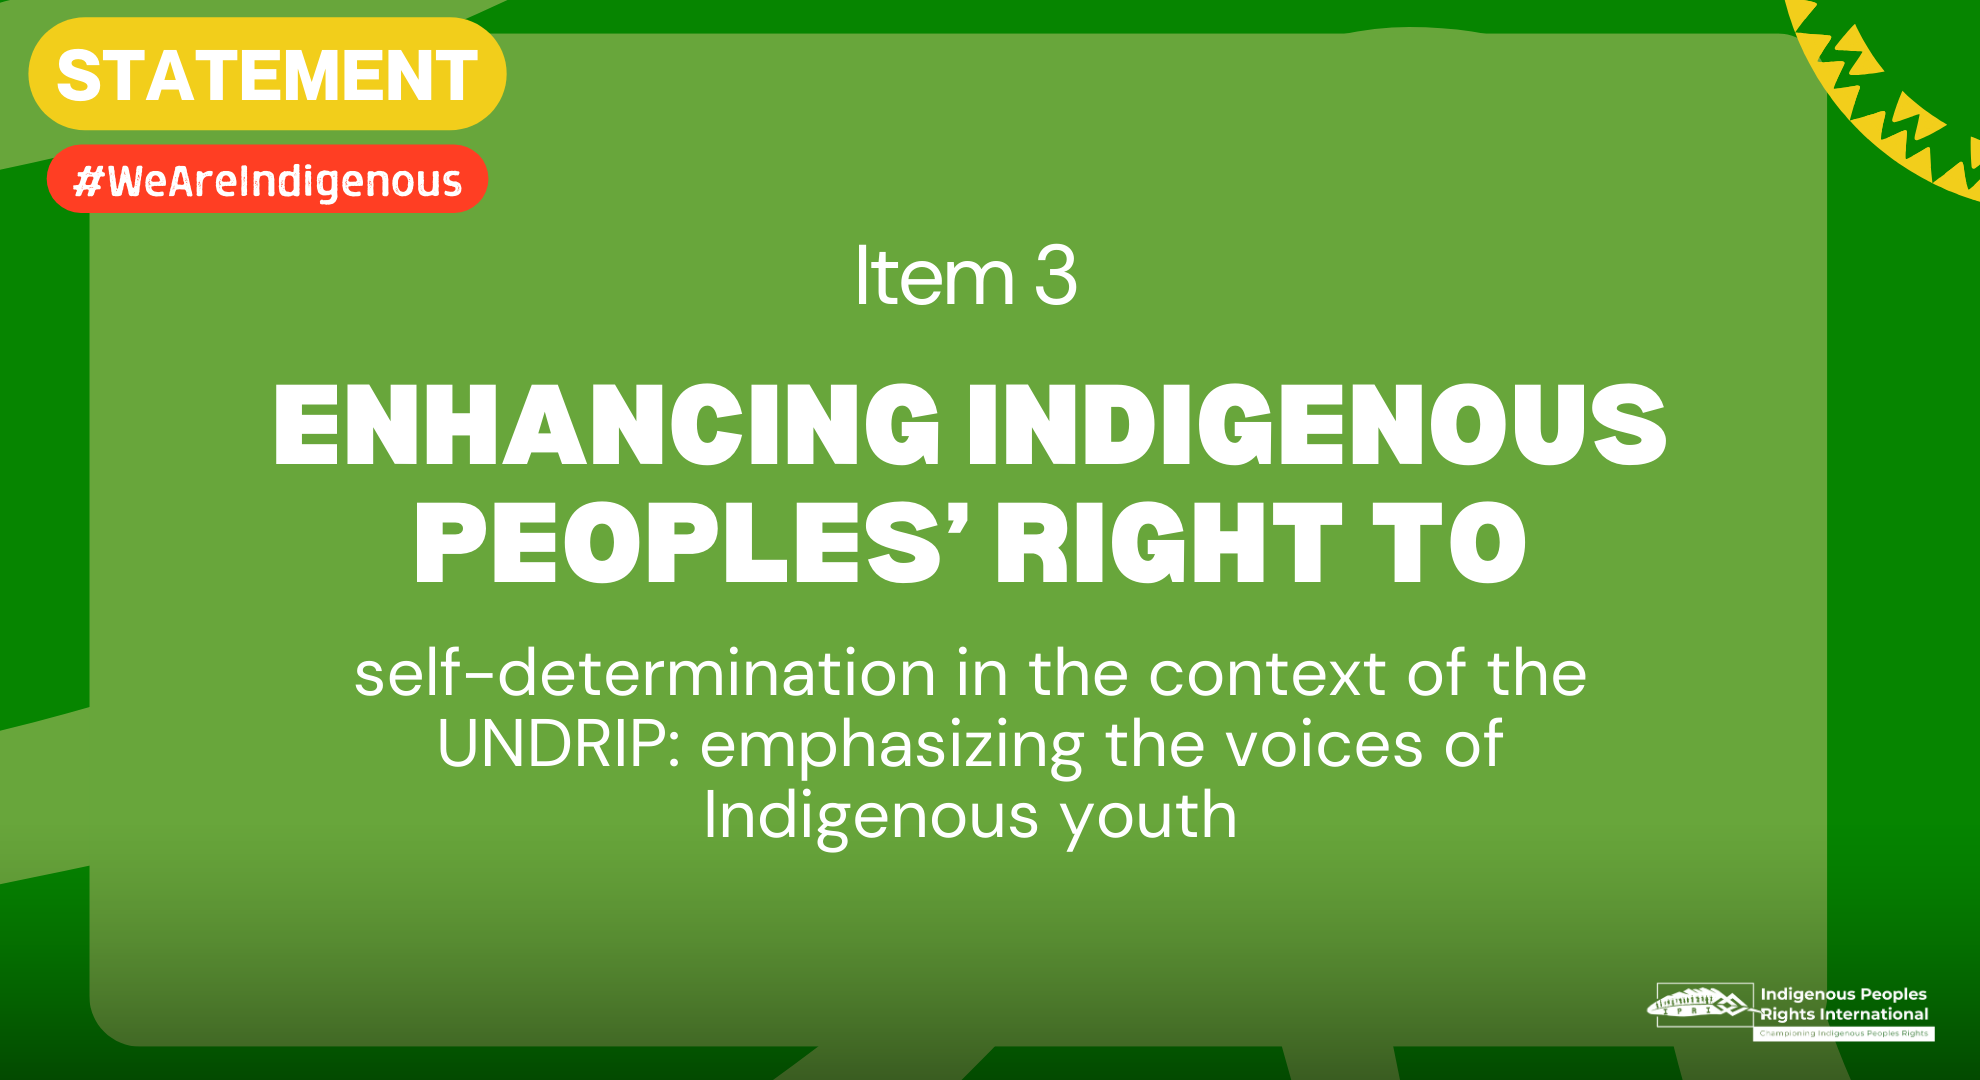 UN Permanent Forum on Indigenous Issues. 23nd session - Item 3